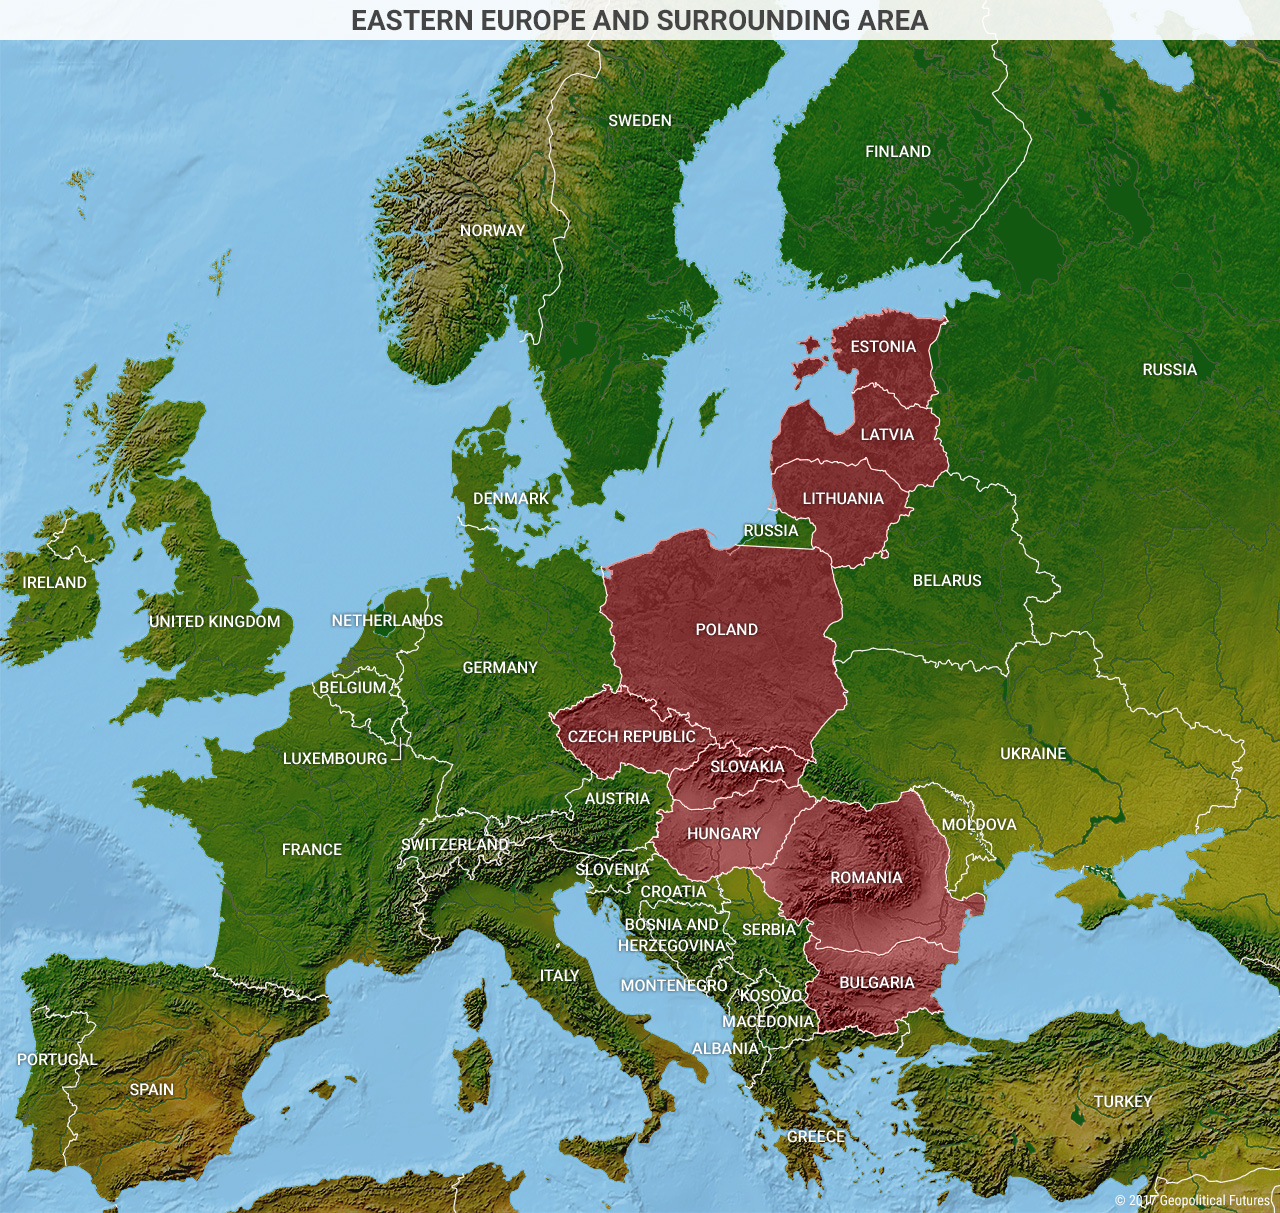  Eastern  Europe  s Competitive Edge Geopolitical Futures